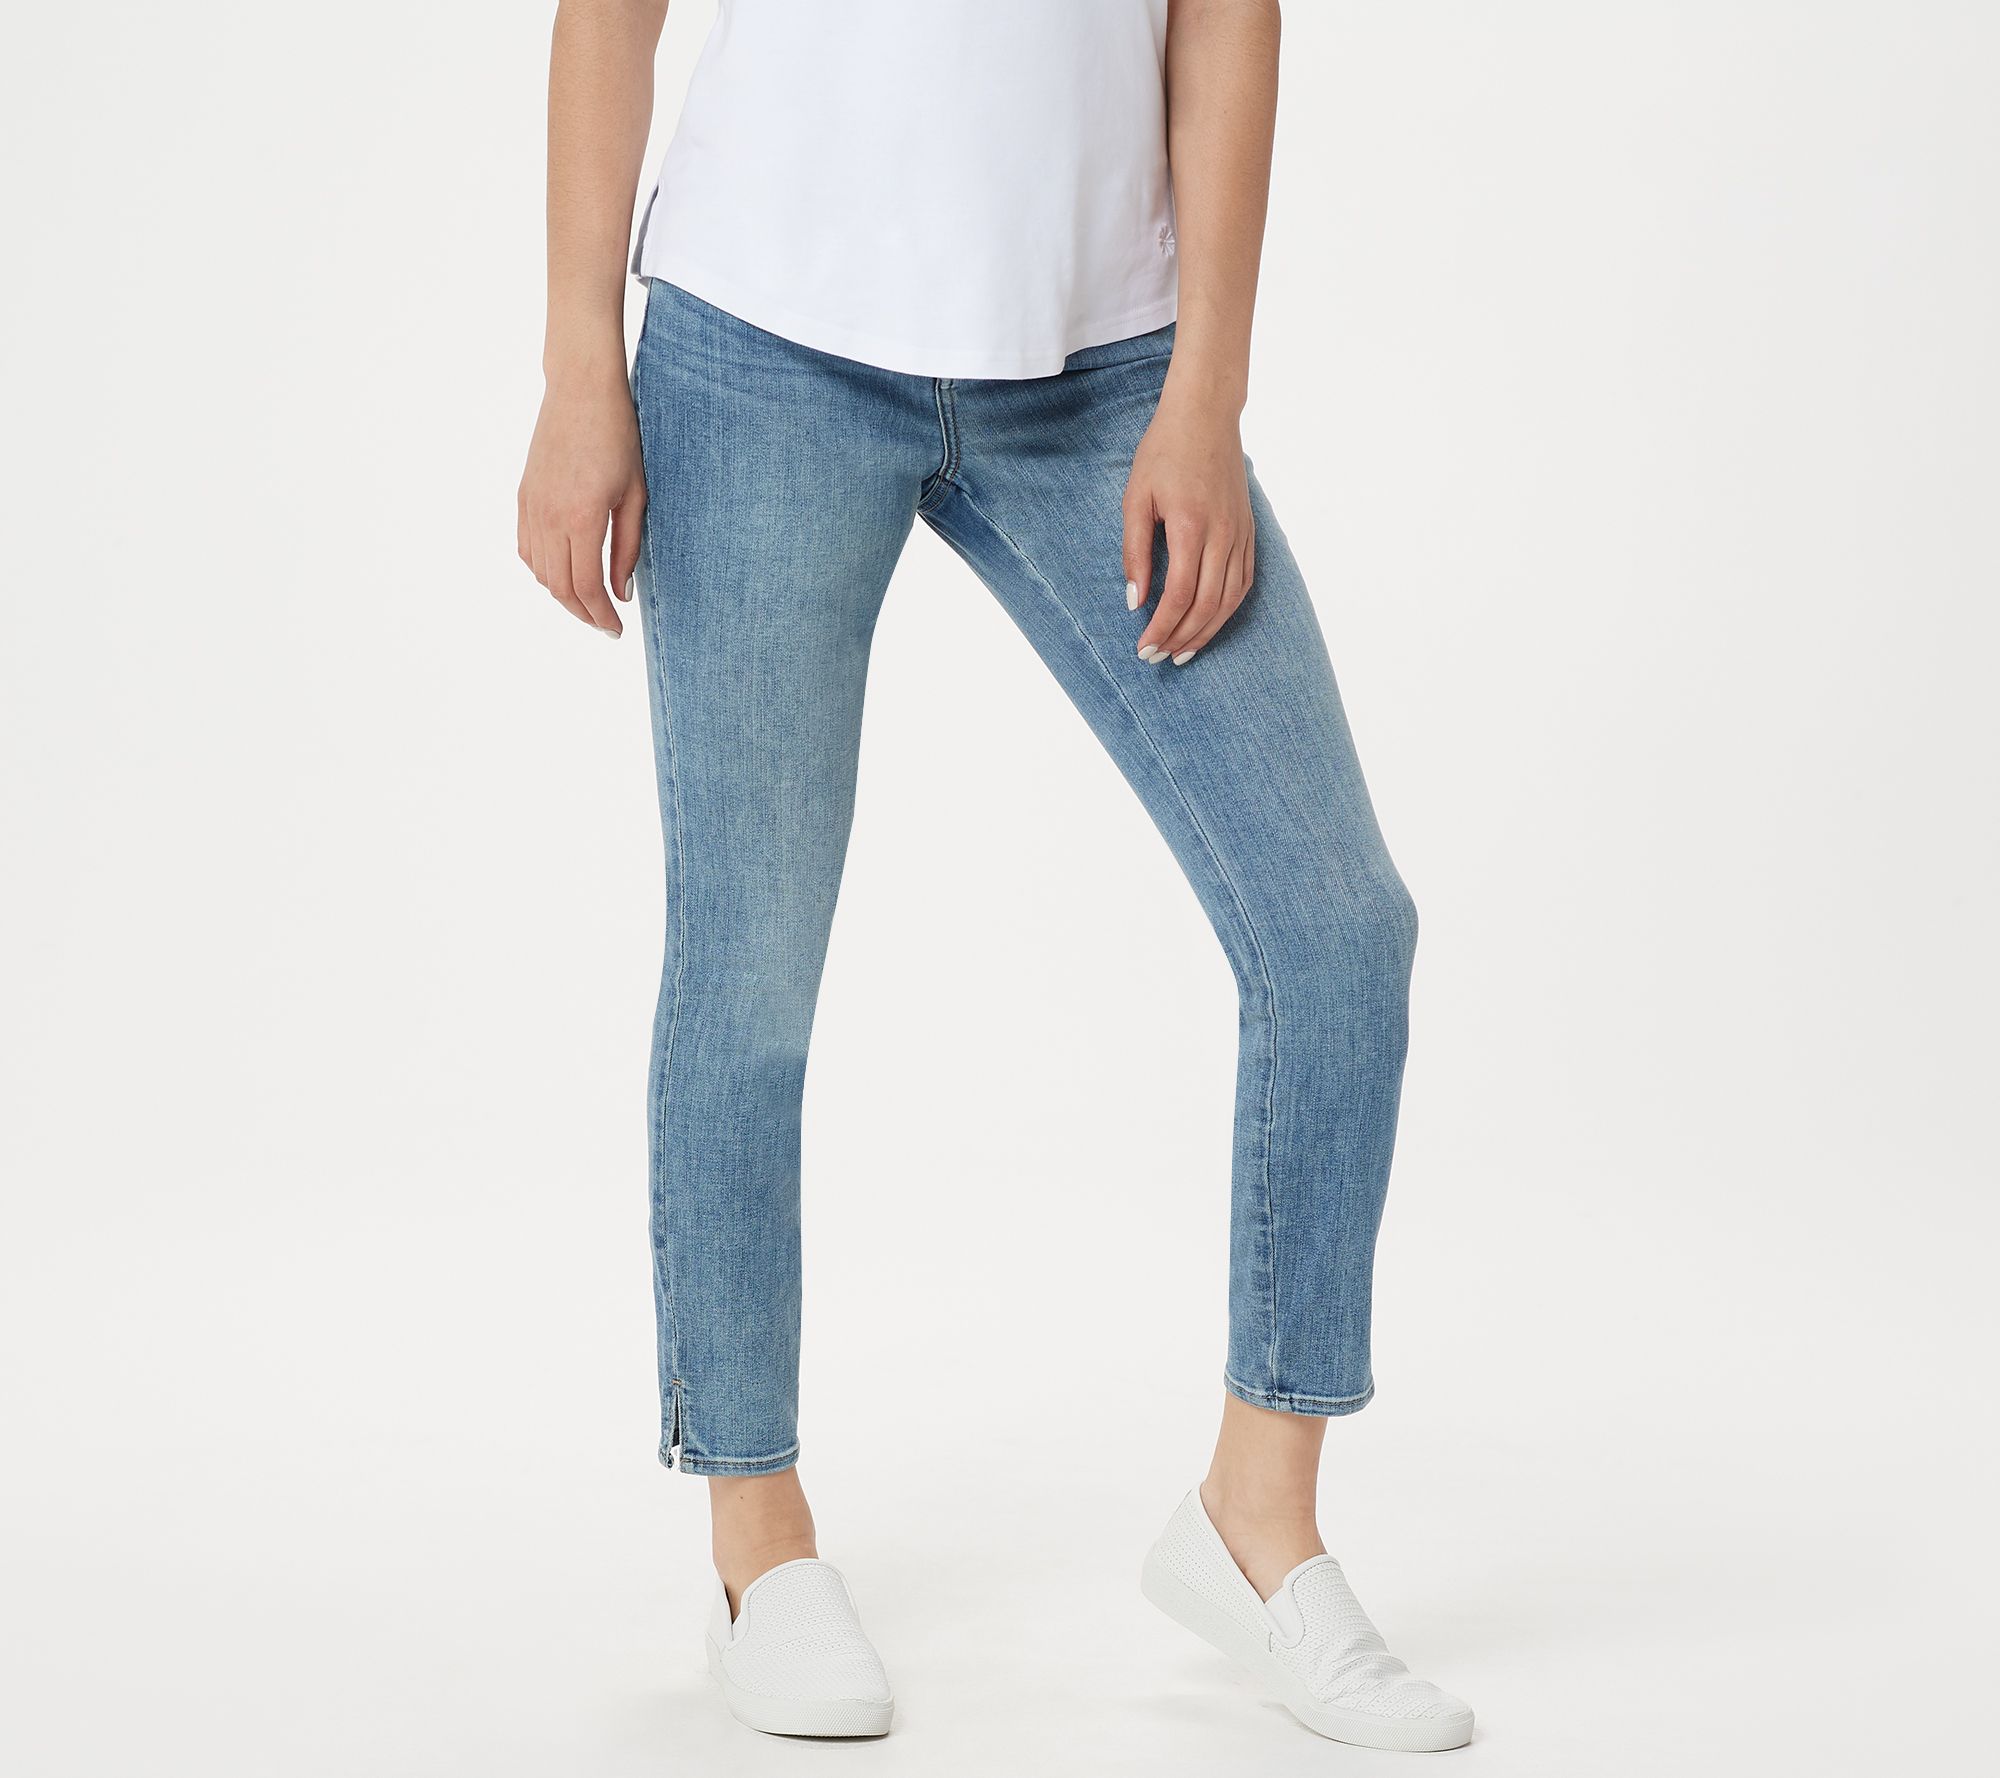 NYDJ Ami Skinny Ankle Jeans with Side Slits - Dreamstate 